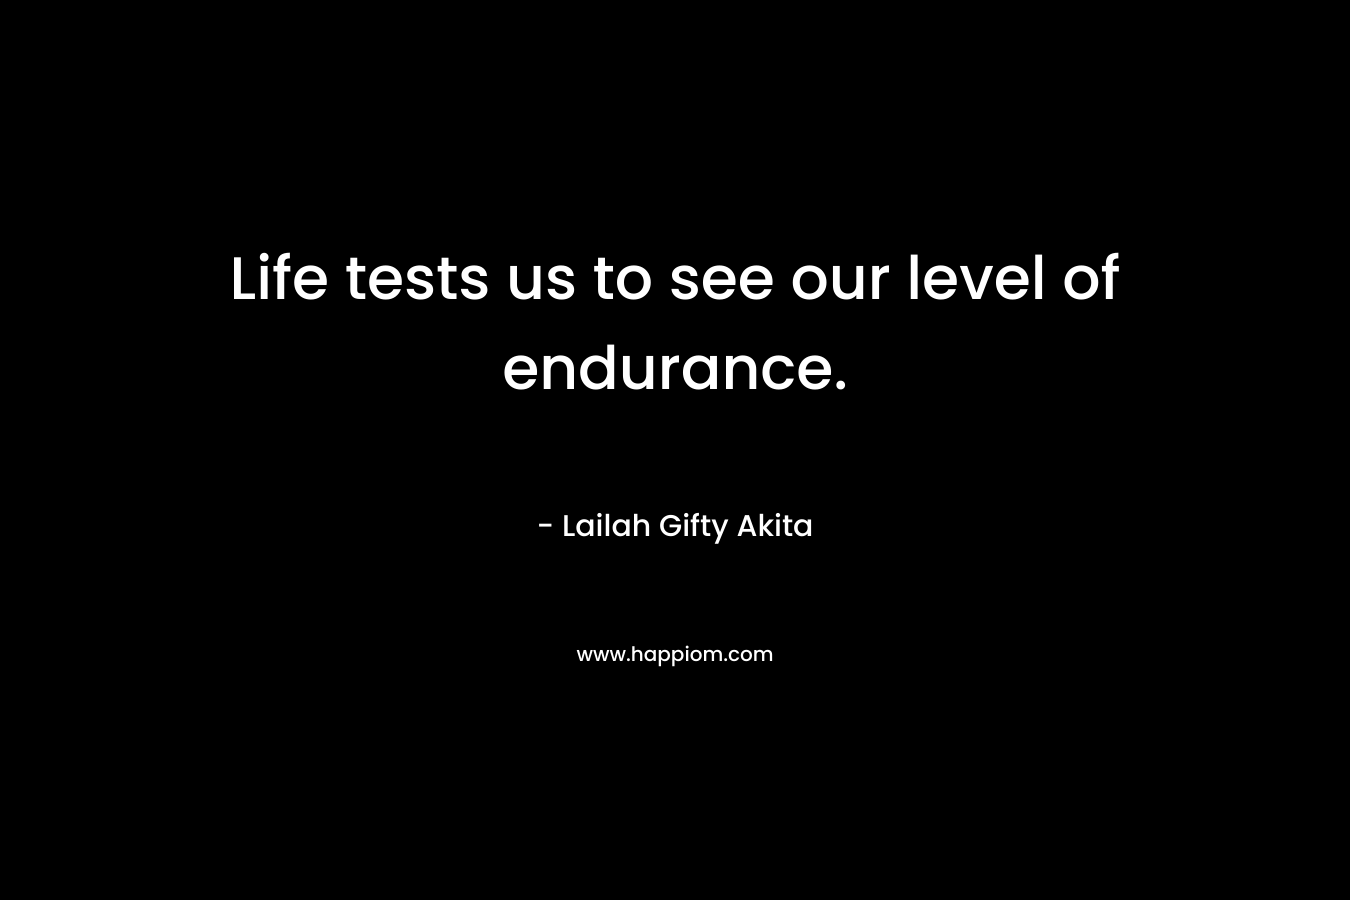 Life tests us to see our level of endurance.